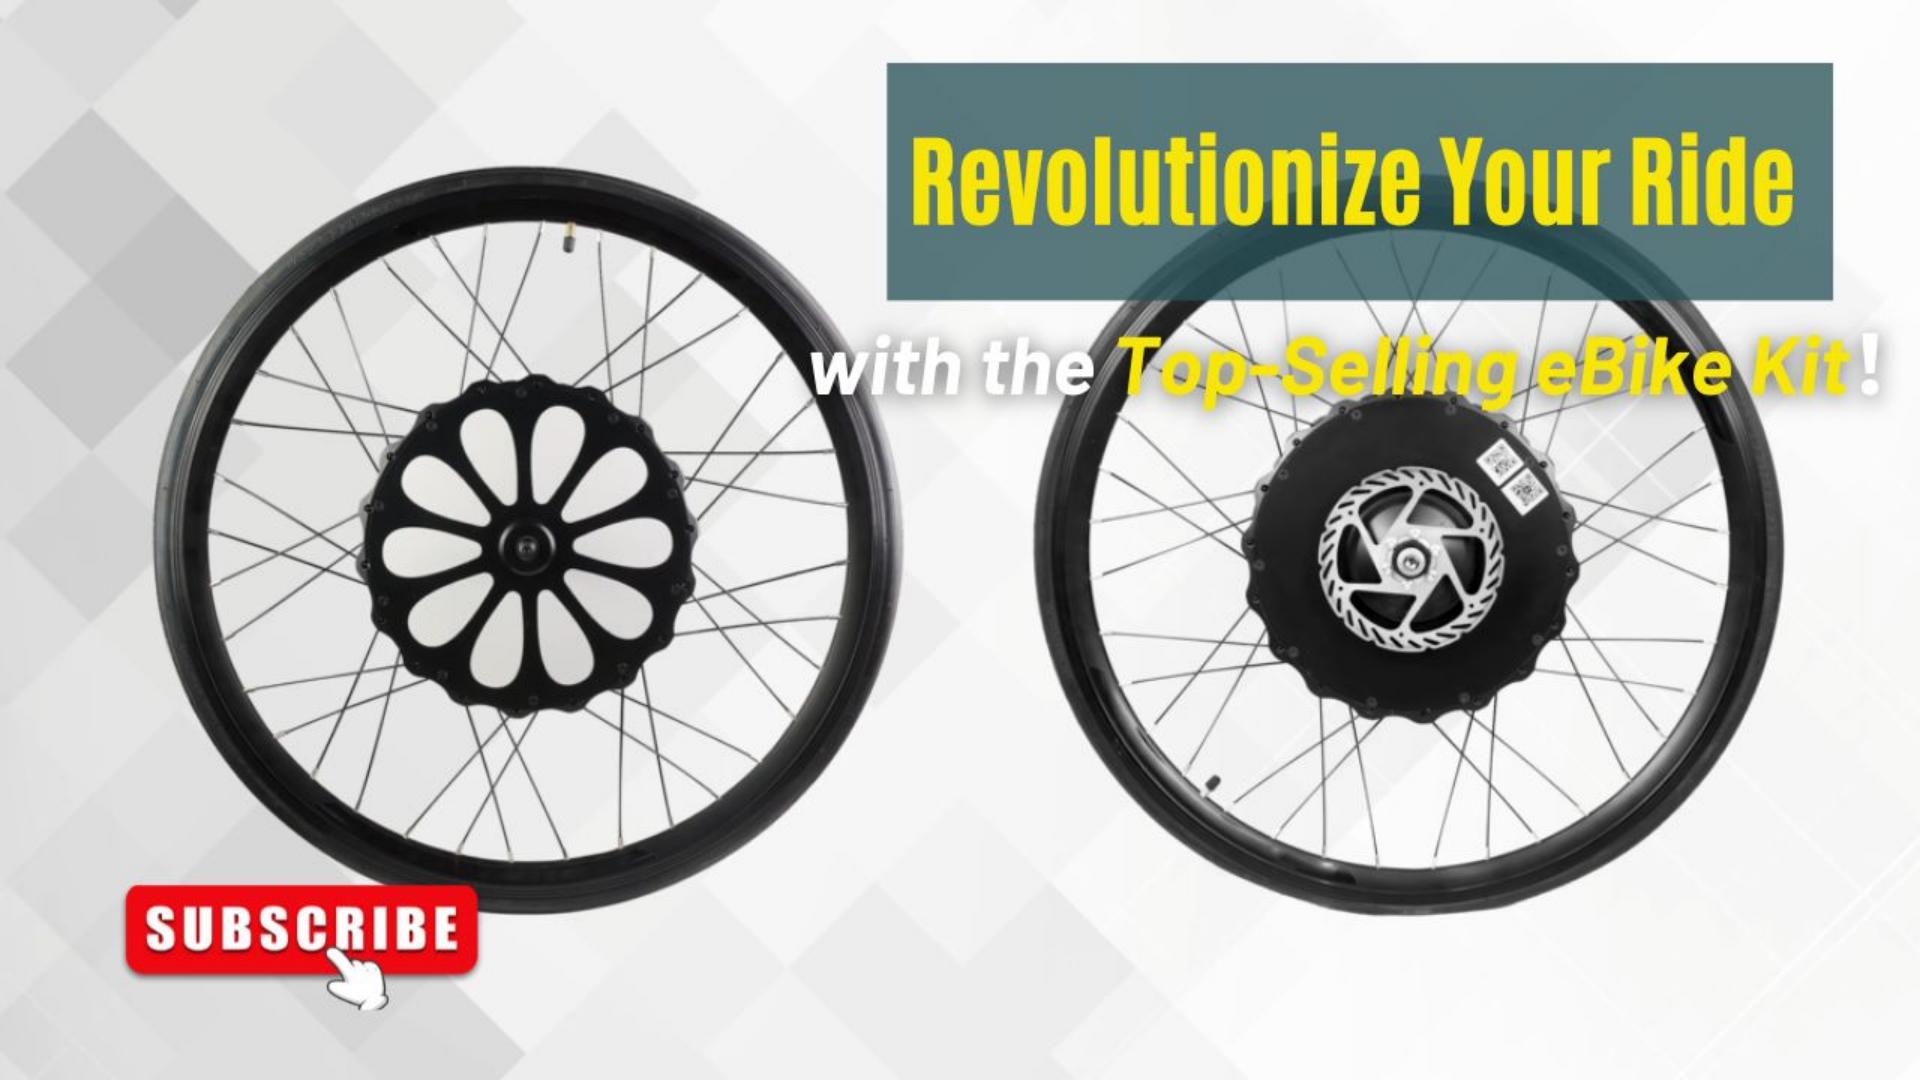 Revolutionize Your Ride with the Top-Selling eBike Kit of the Season!